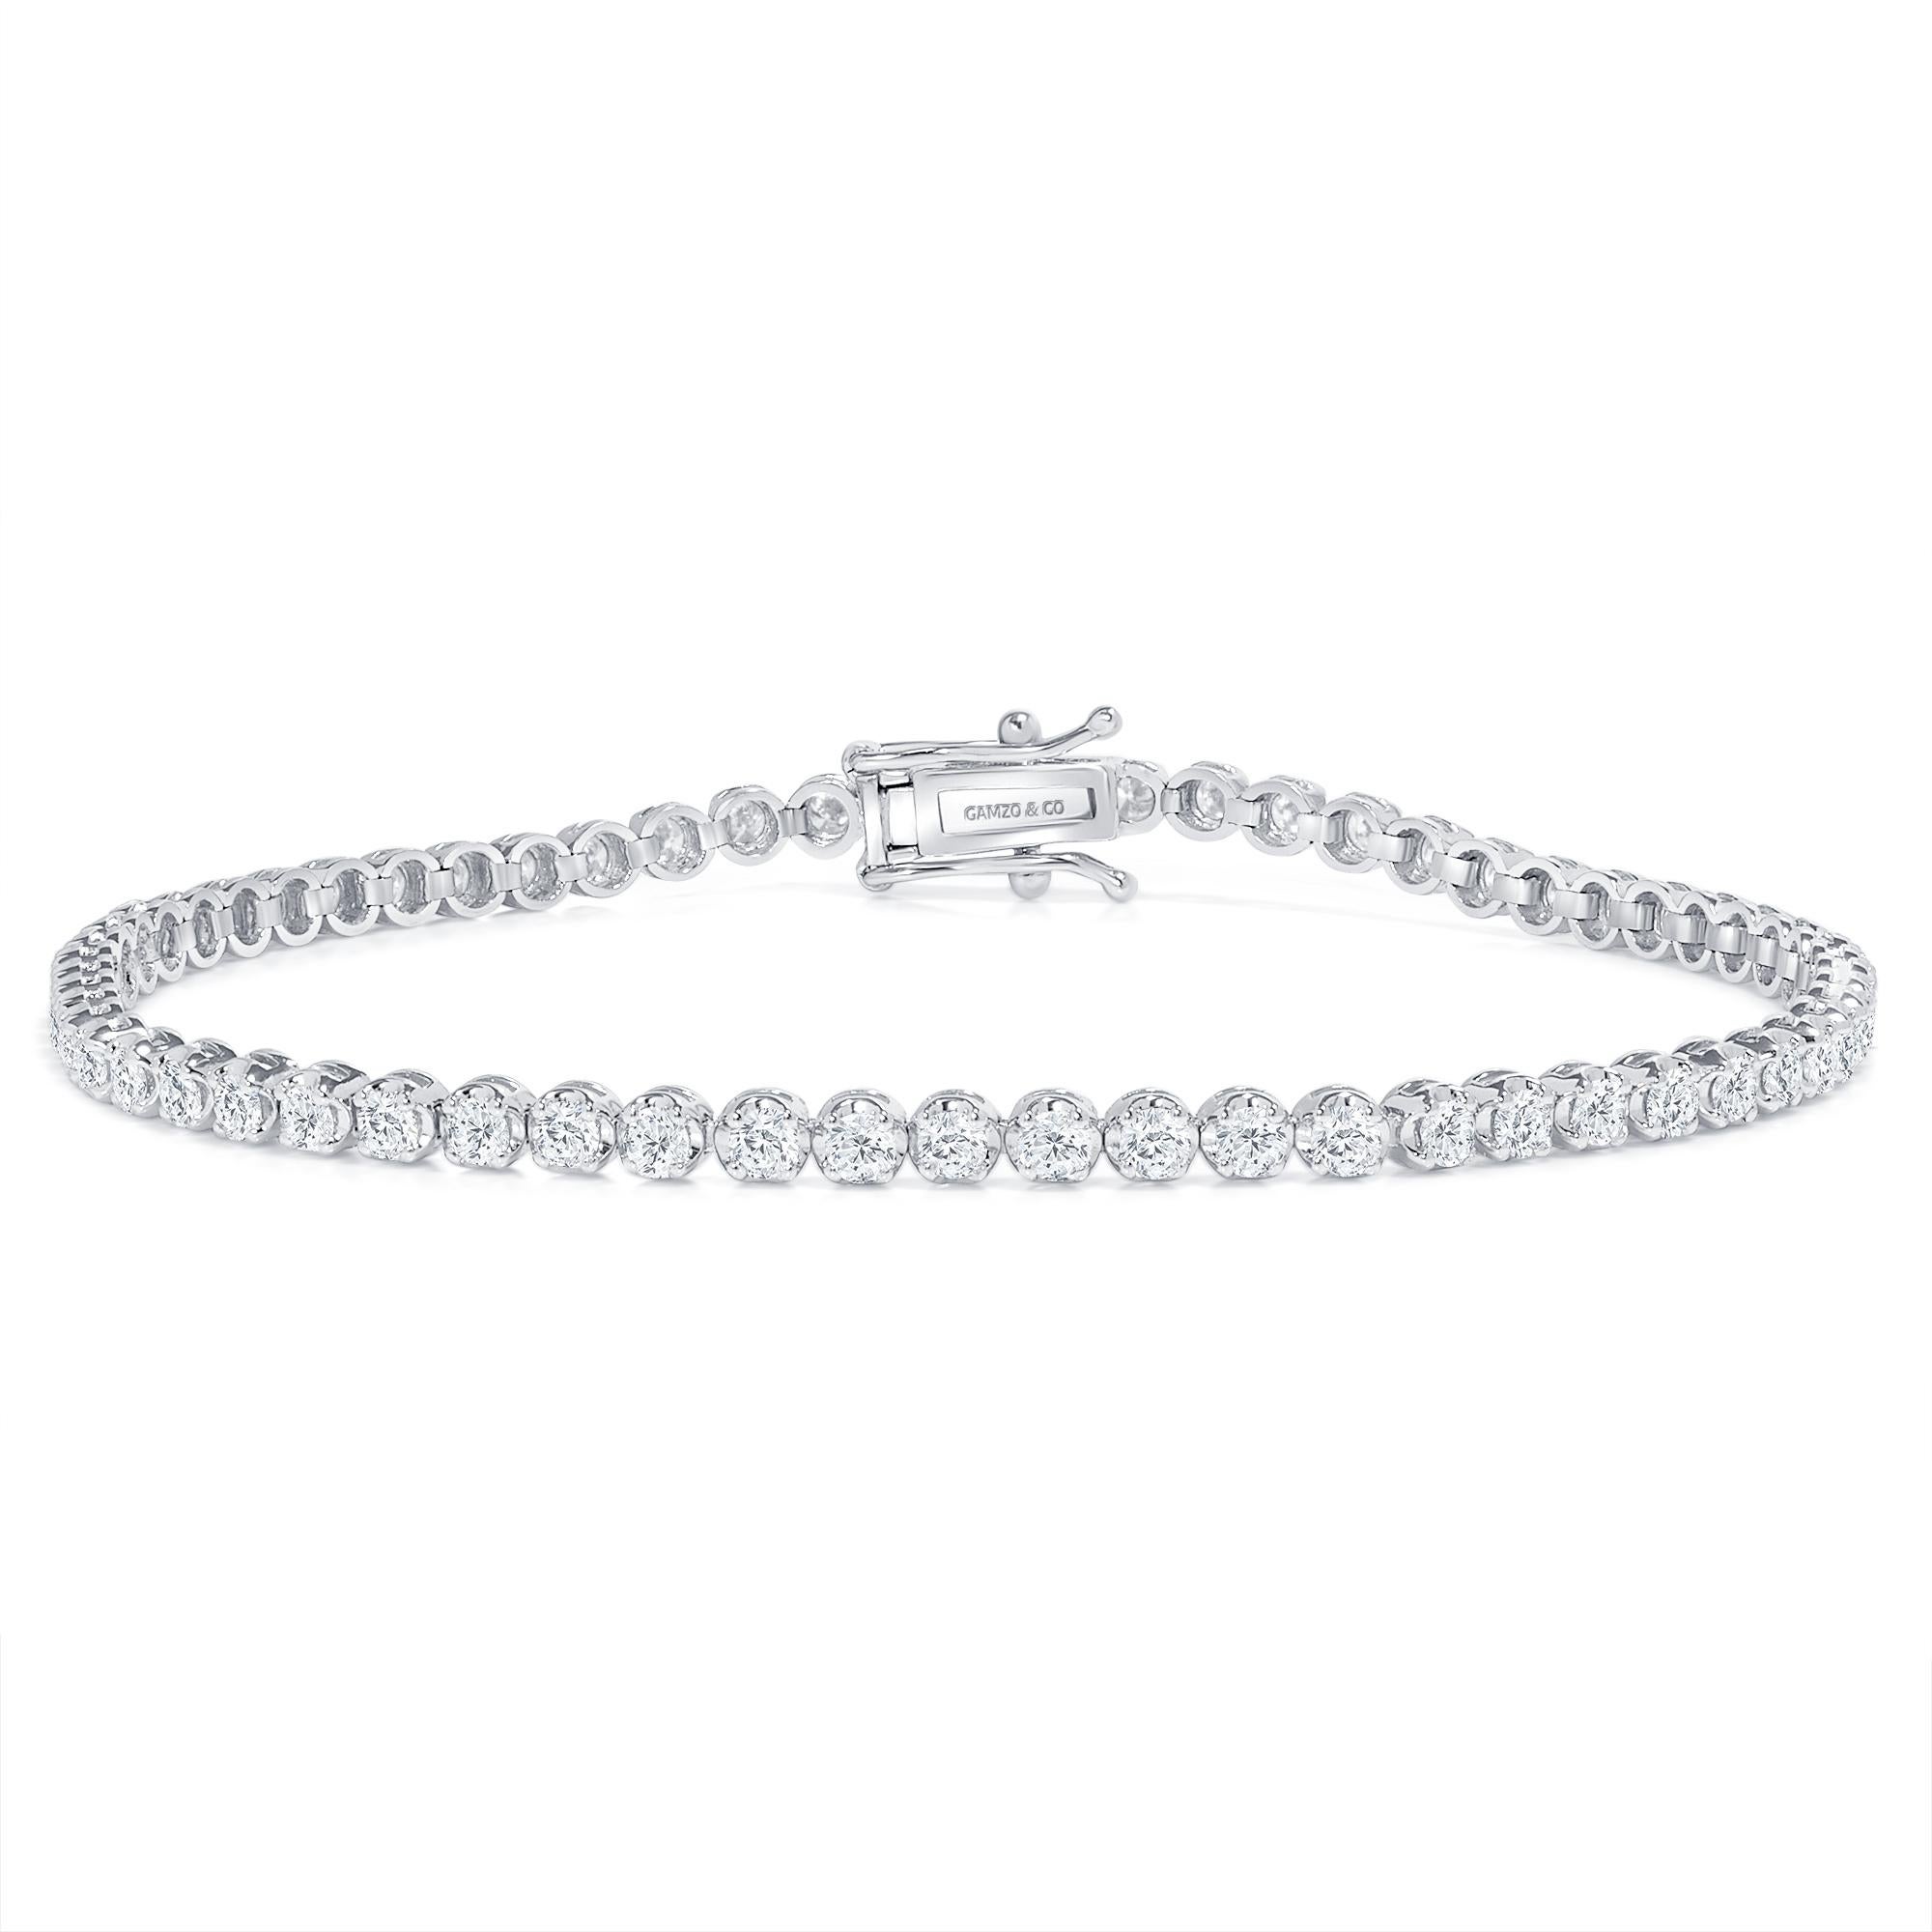 These beautiful round diamonds dance around your wrist as they absorb light and attention.
Metal: 14k Gold
Diamond Cut: Round
Diamond Total Carats: 3ct
Diamond Clarity: VS
Diamond Color: F
Color: White Gold
Bracelet Length: 6 Inches 
Included with